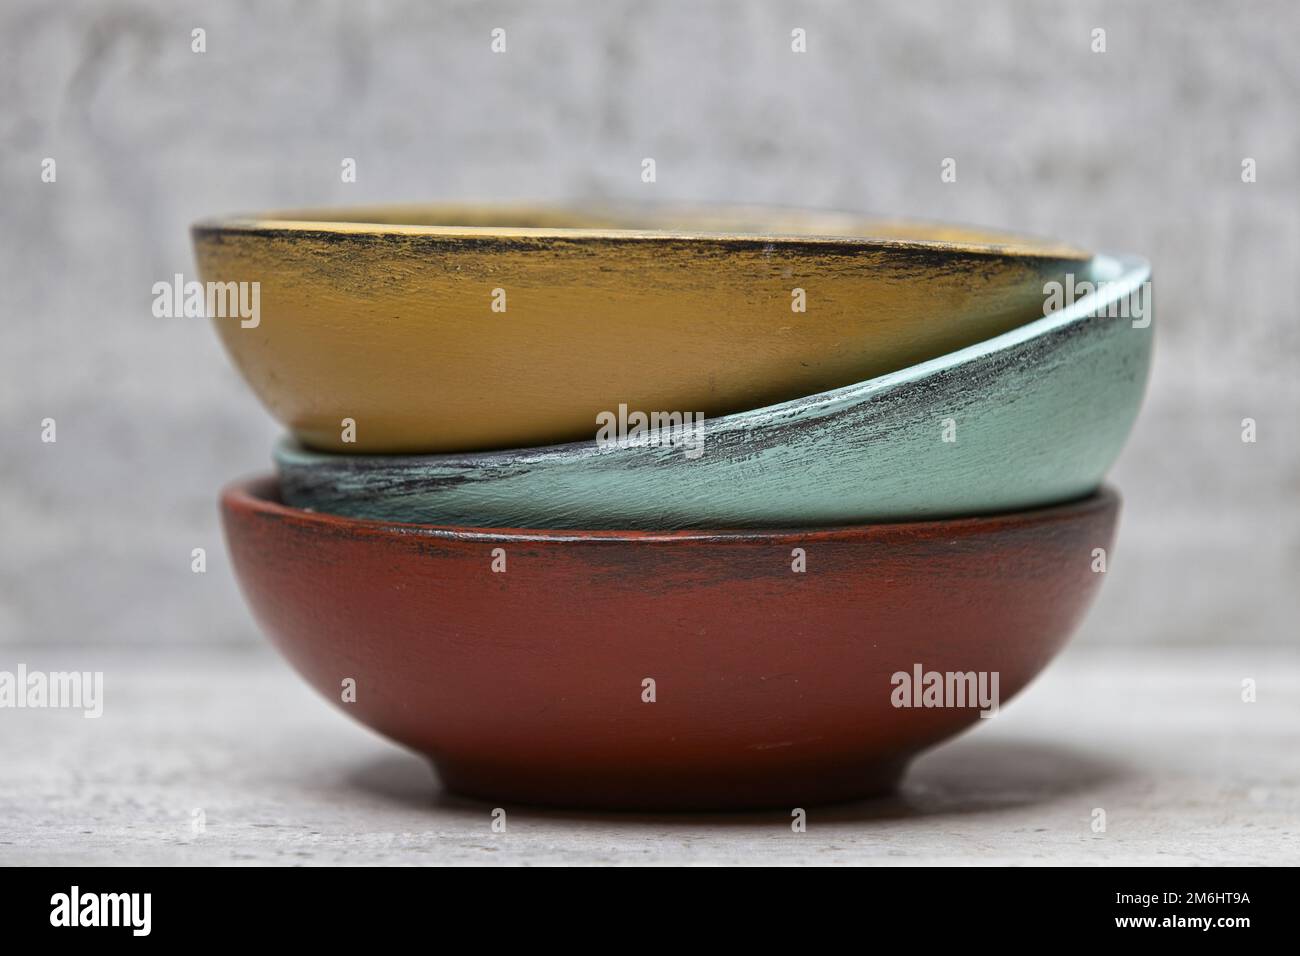 Thick glass mugs stacked. Drinking water storage containers. Light  background Stock Photo - Alamy